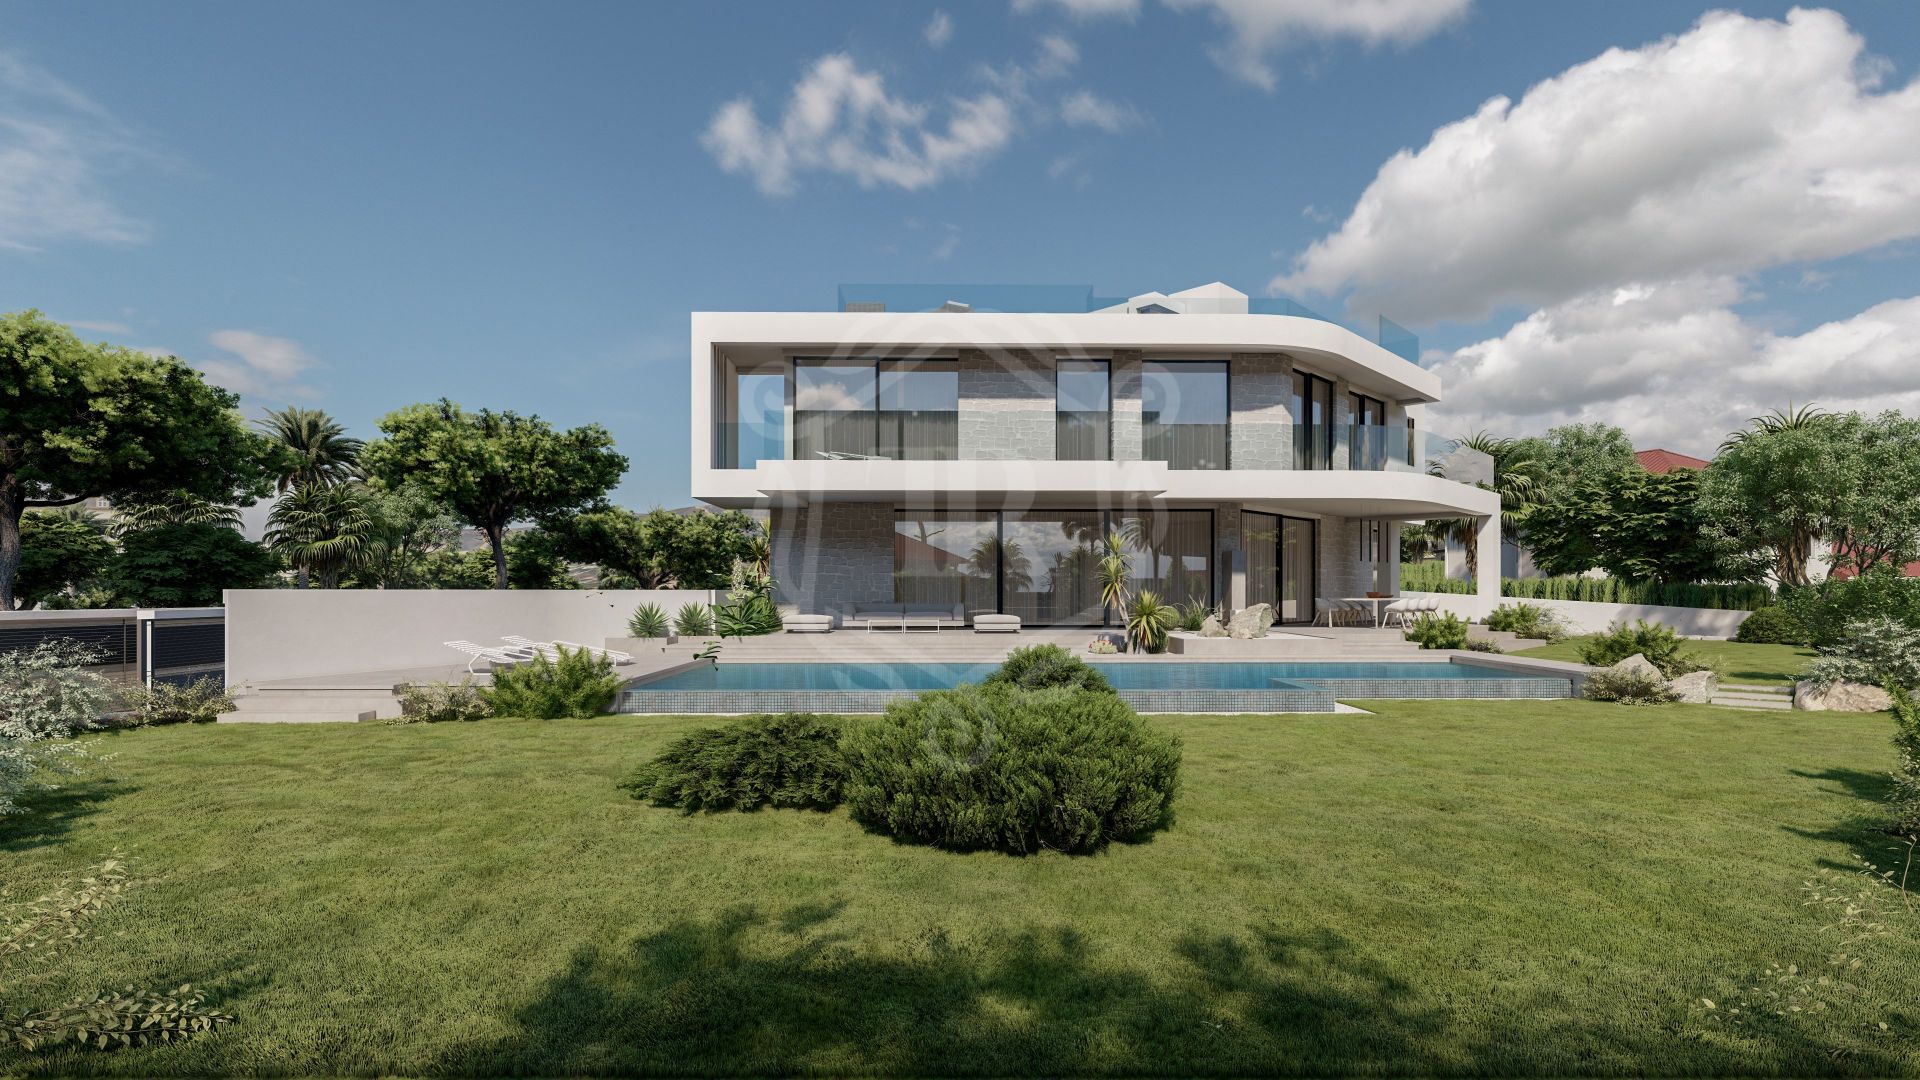 STUNNING NEW BUILT VILLA WITH SEA VIEWS IN UNBEATABLE LOCATION.